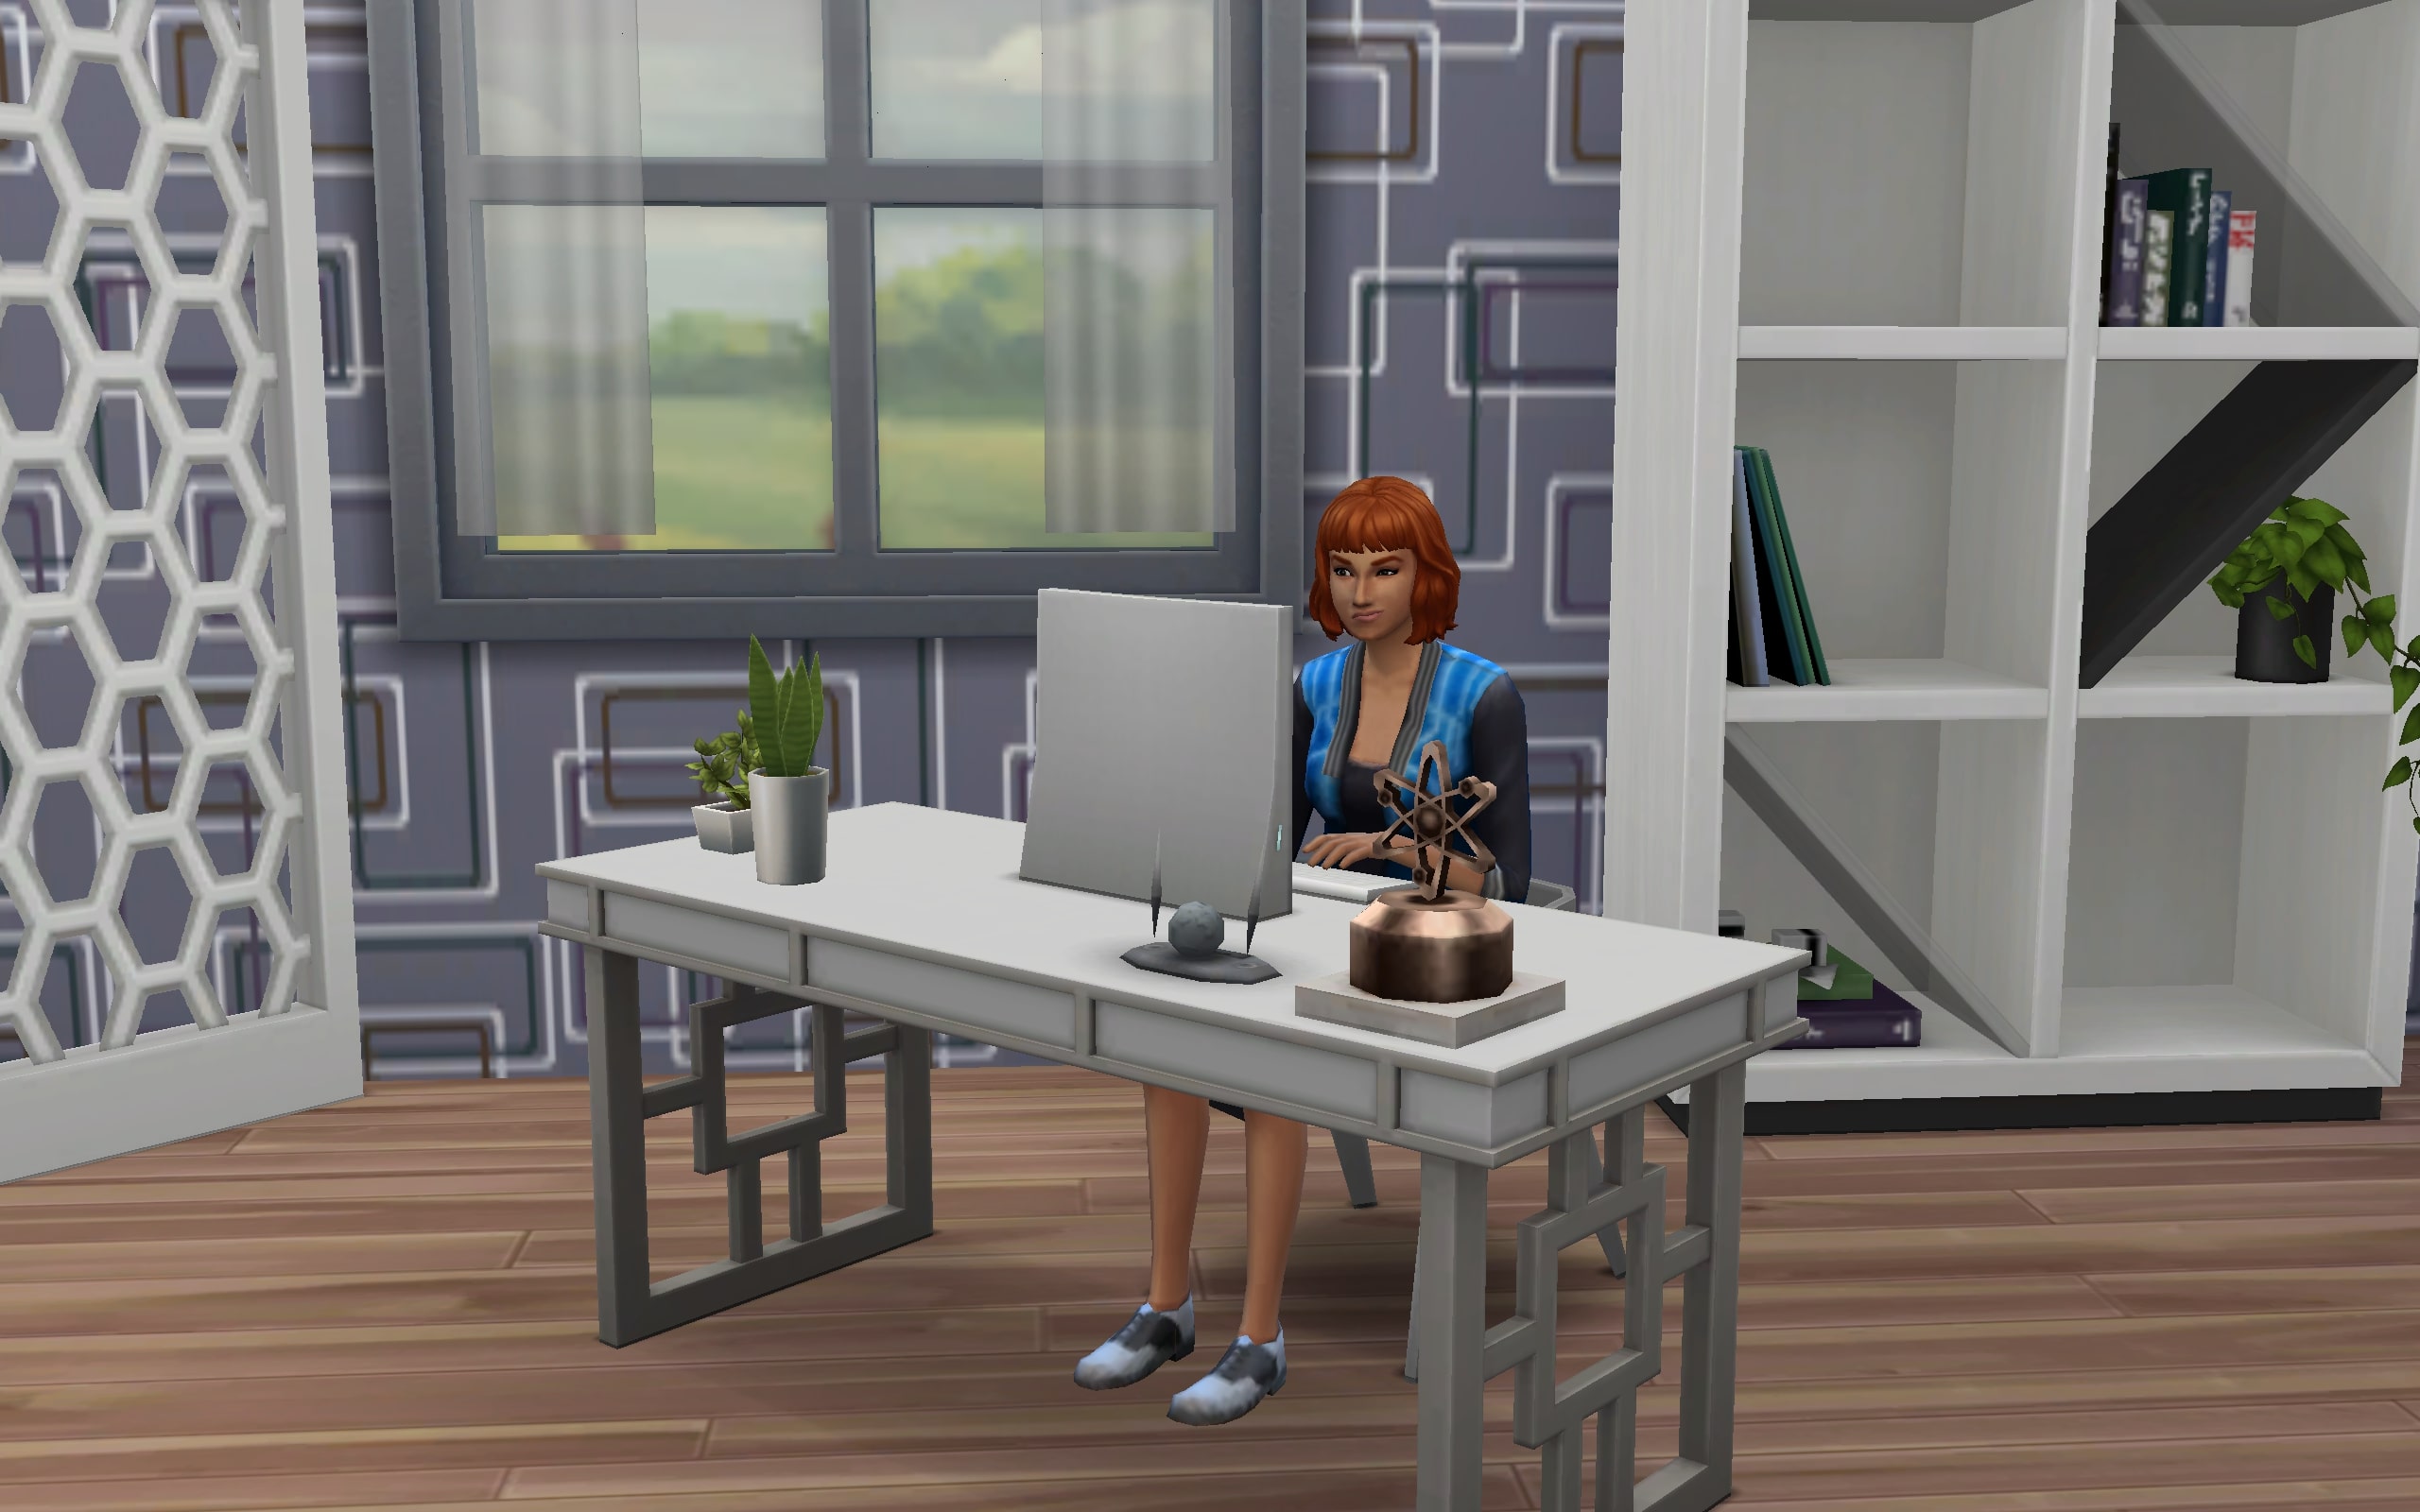 A (grumpy) Freelancer Sim is getting her gig done on the computer.